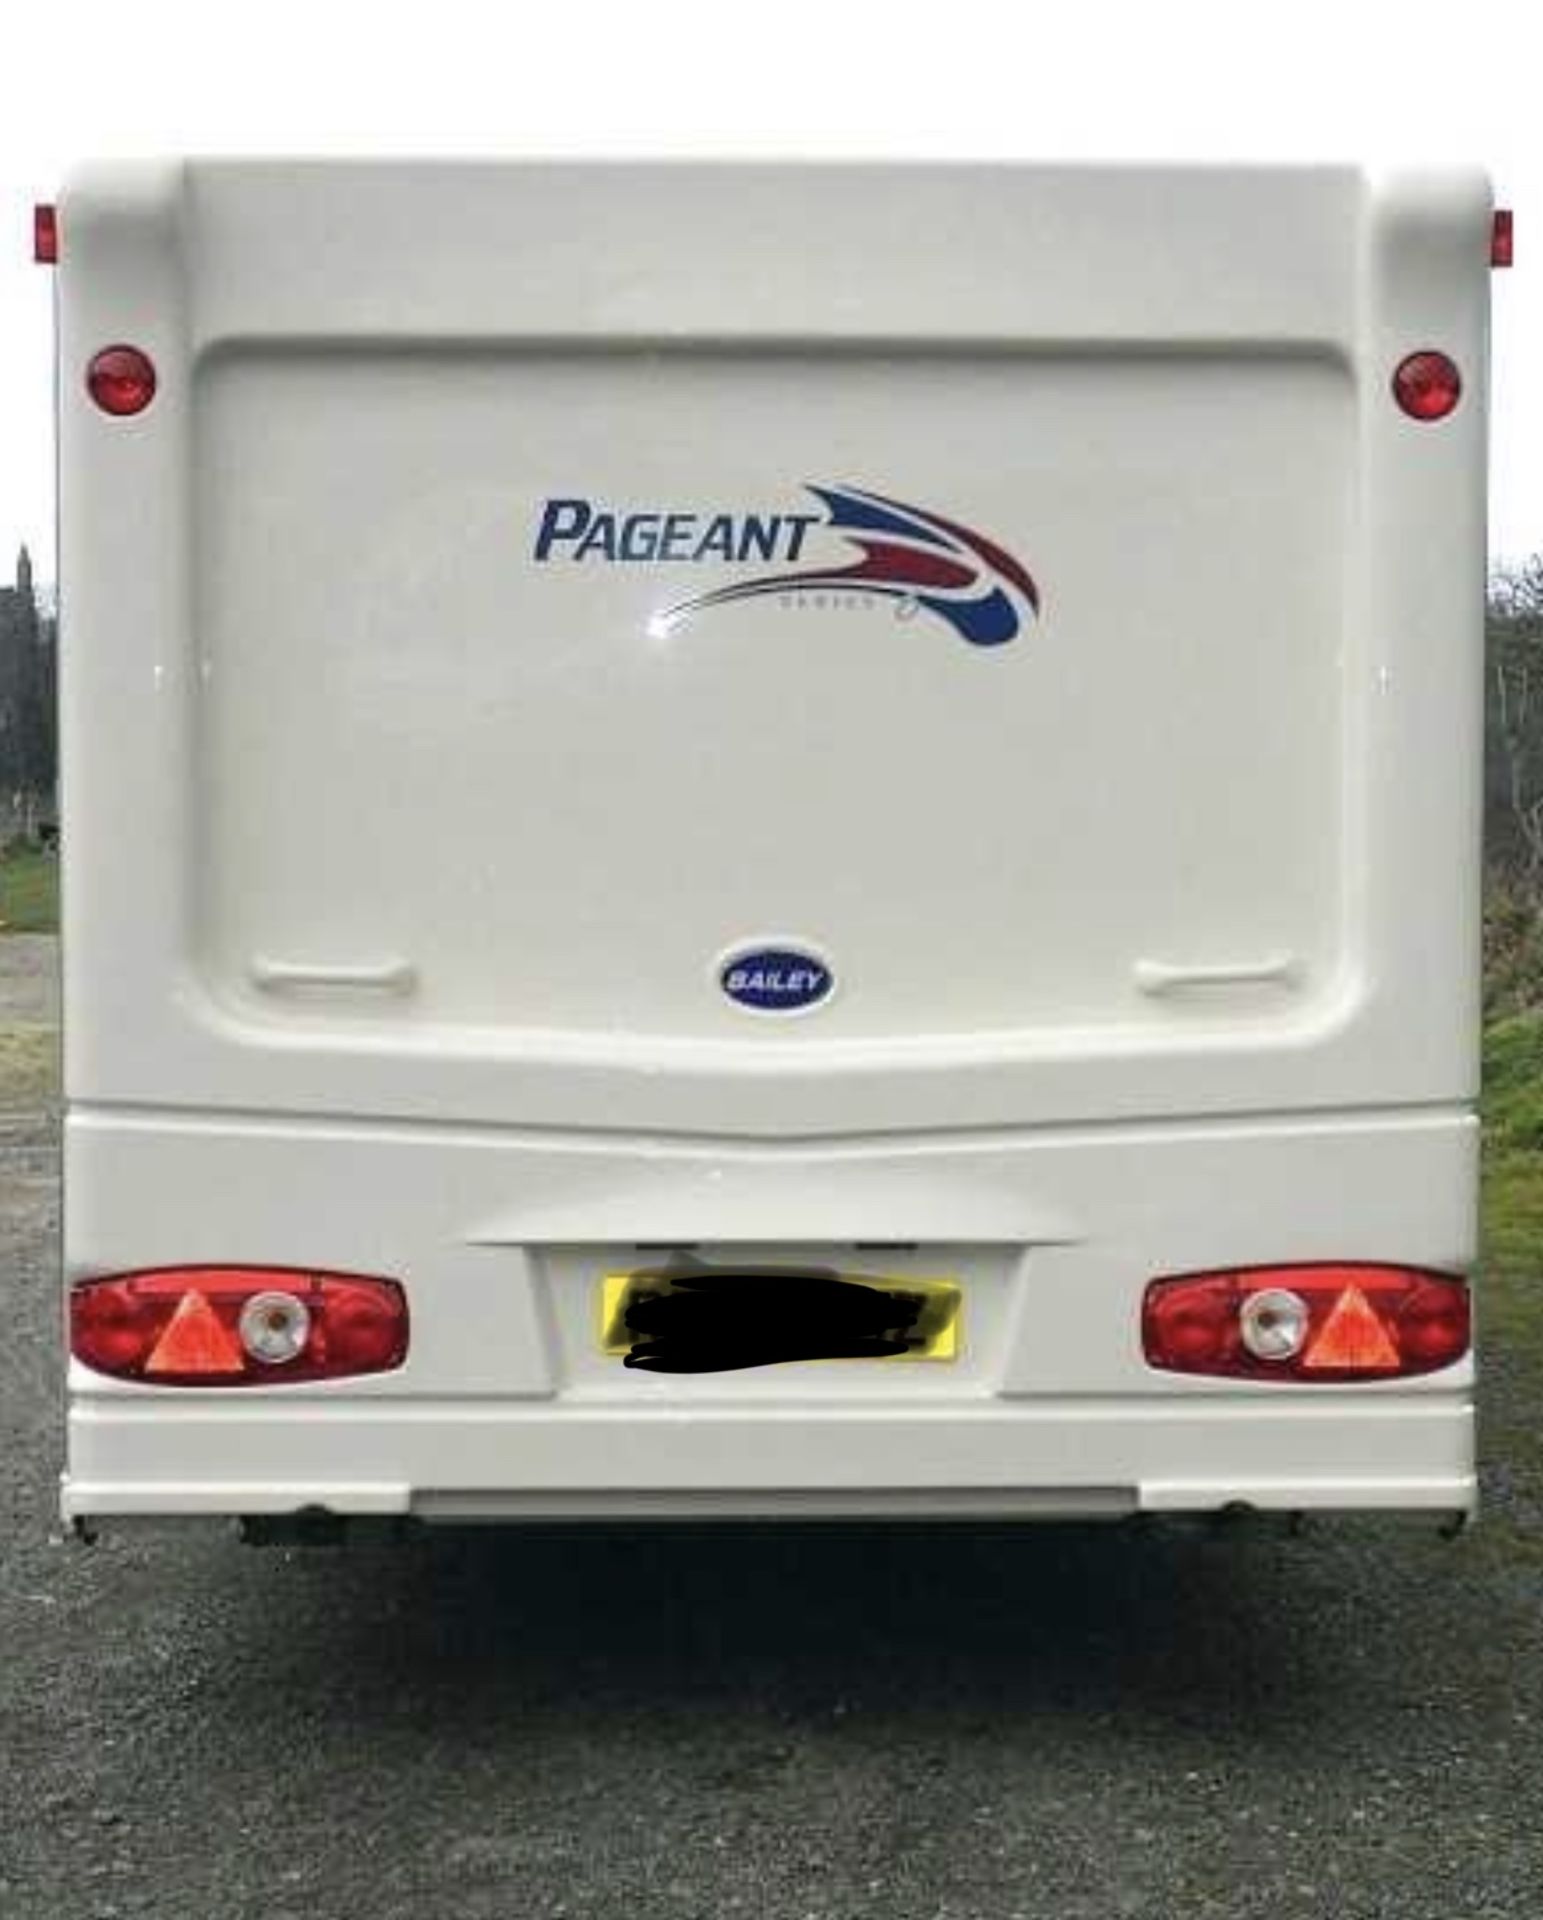 BAILEY PAGEANT CHAMPAGNE SERIES 6 MODEL**2007**4 BERTH**TOURING CARAVAN*** - Image 5 of 20